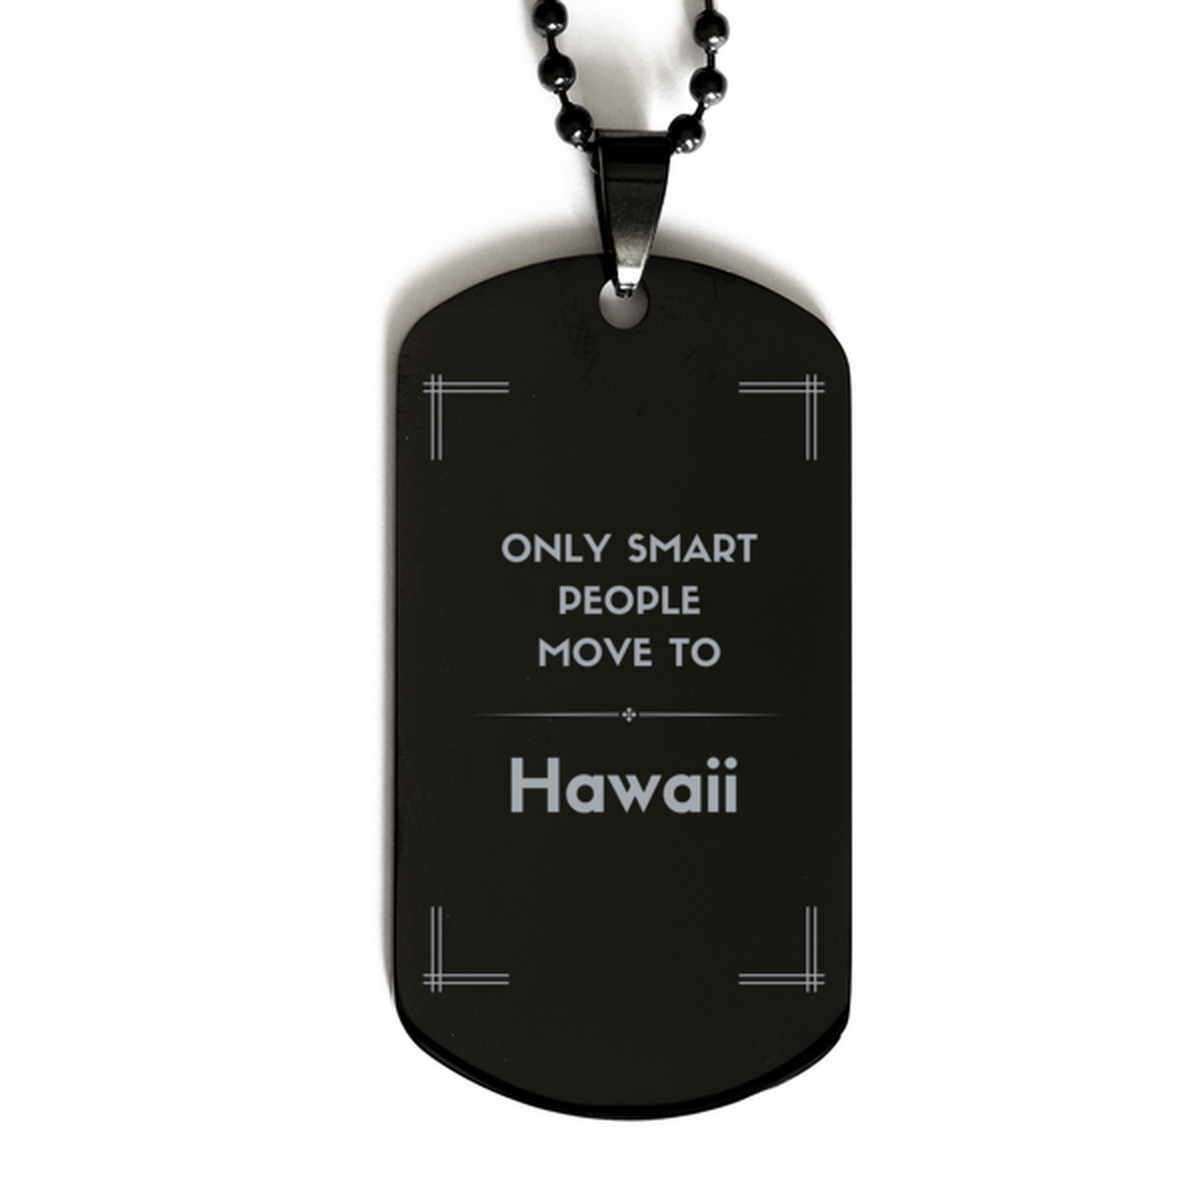 Only smart people move to Hawaii Black Dog Tag, Gag Gifts For Hawaii, Move to Hawaii Gifts for Friends Coworker Funny Saying Quote